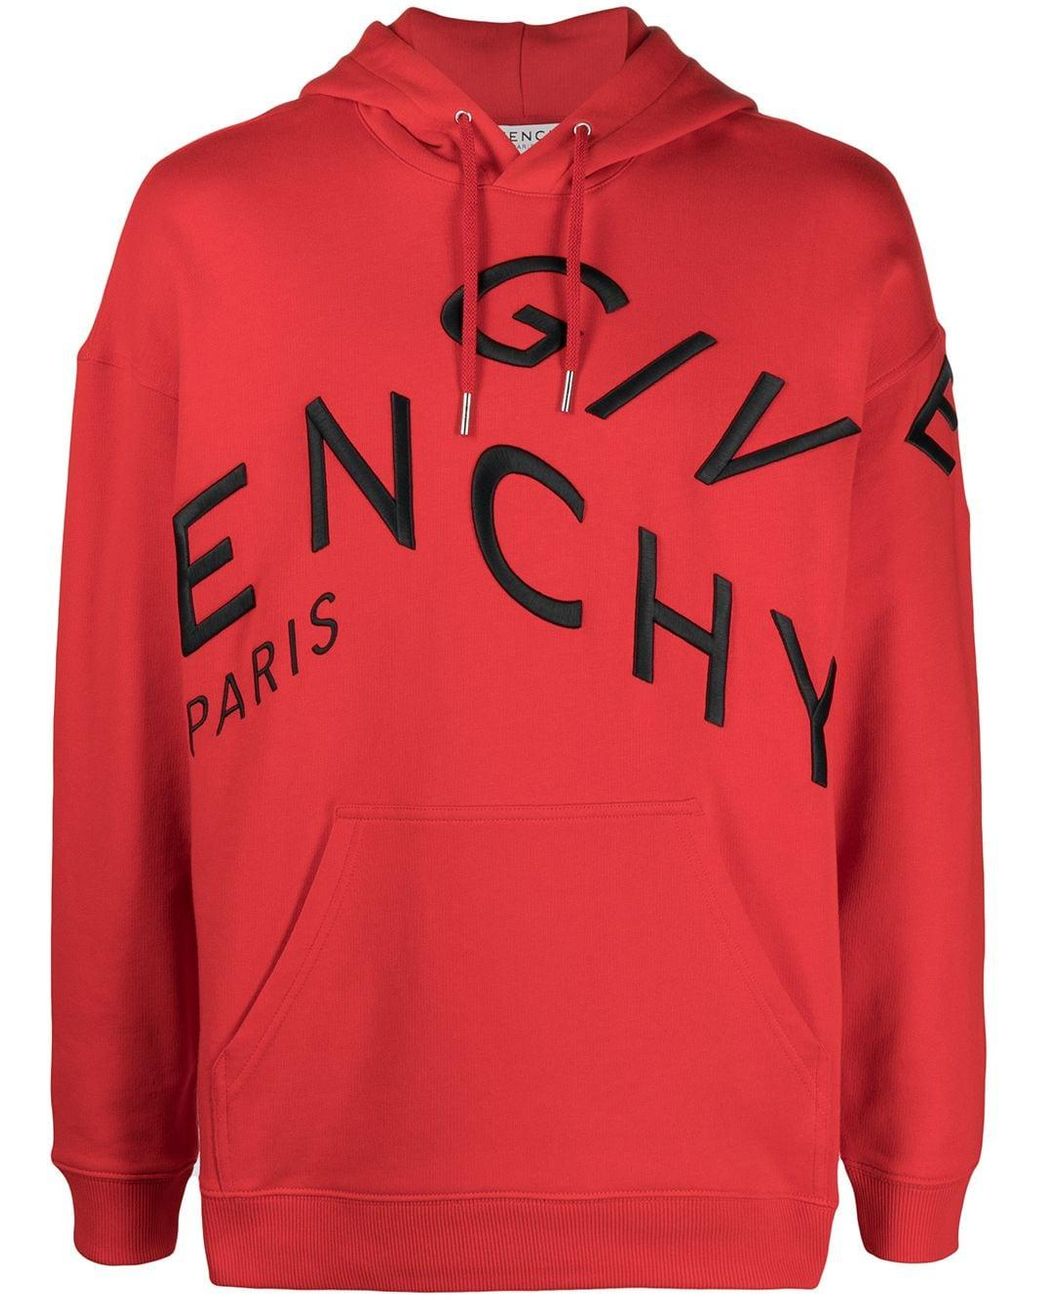 Givenchy Cotton Refracted Logo Embroidery Hoodie in Red for Men - Lyst